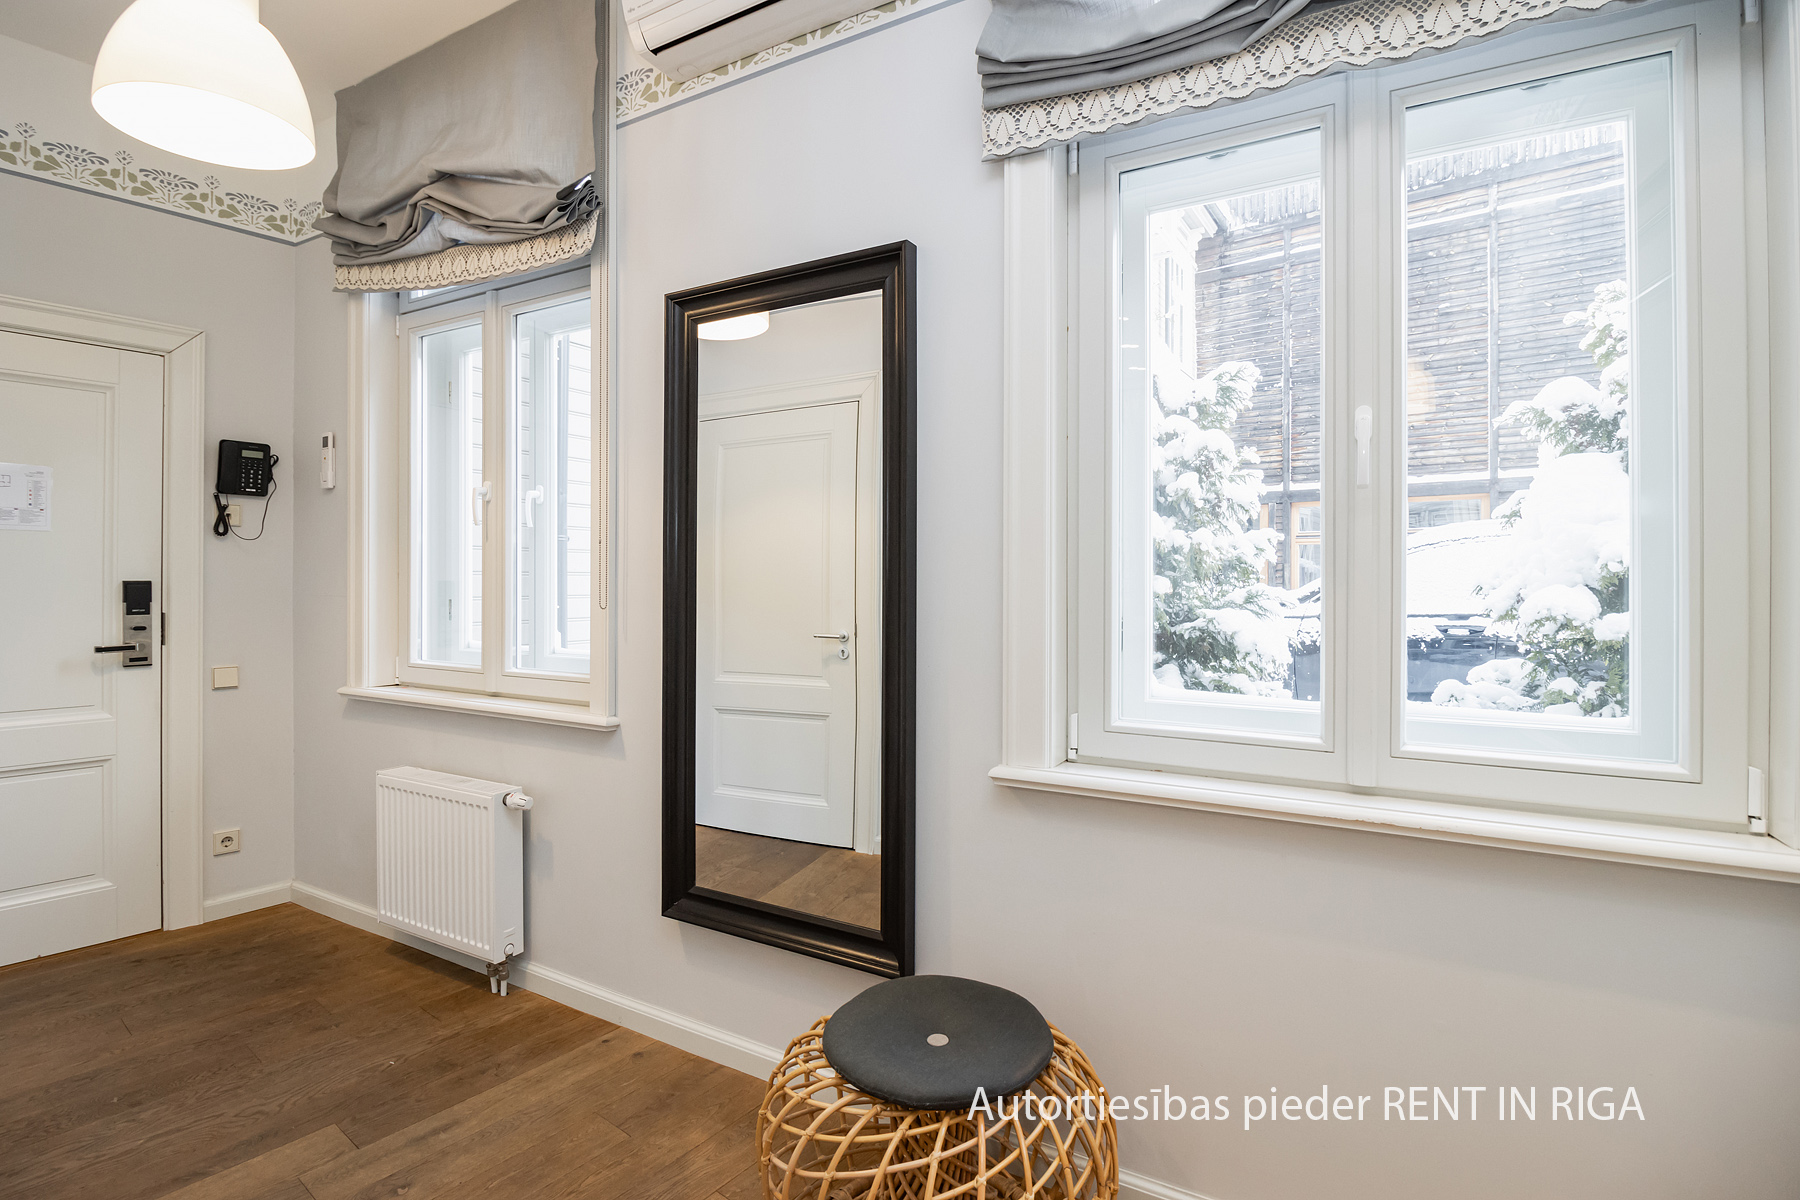 Apartment for rent, Jomas street 92 - Image 1